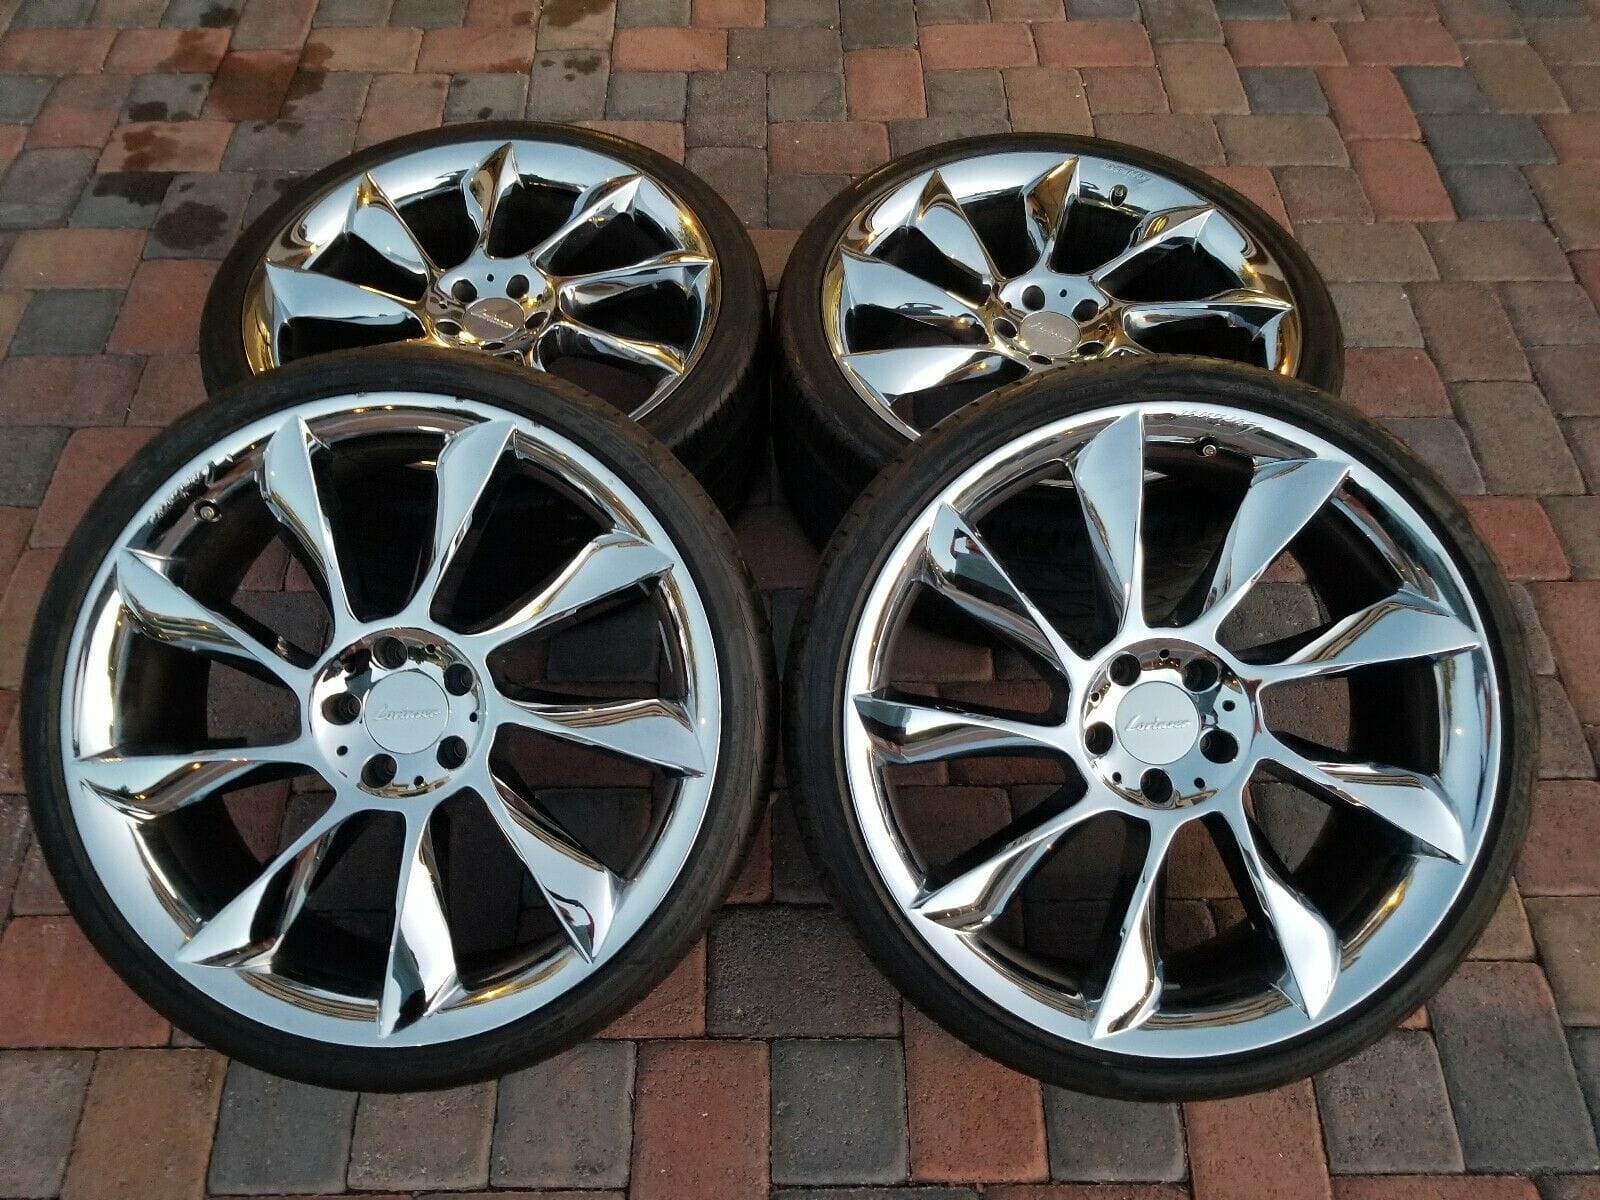 Wheels and Tires/Axles - RARE 21" MERCEDES BENZ LORINSER RS8 WHEELS RIMS TIRES CHROME - Used - Las Vegas, NV 89139, United States